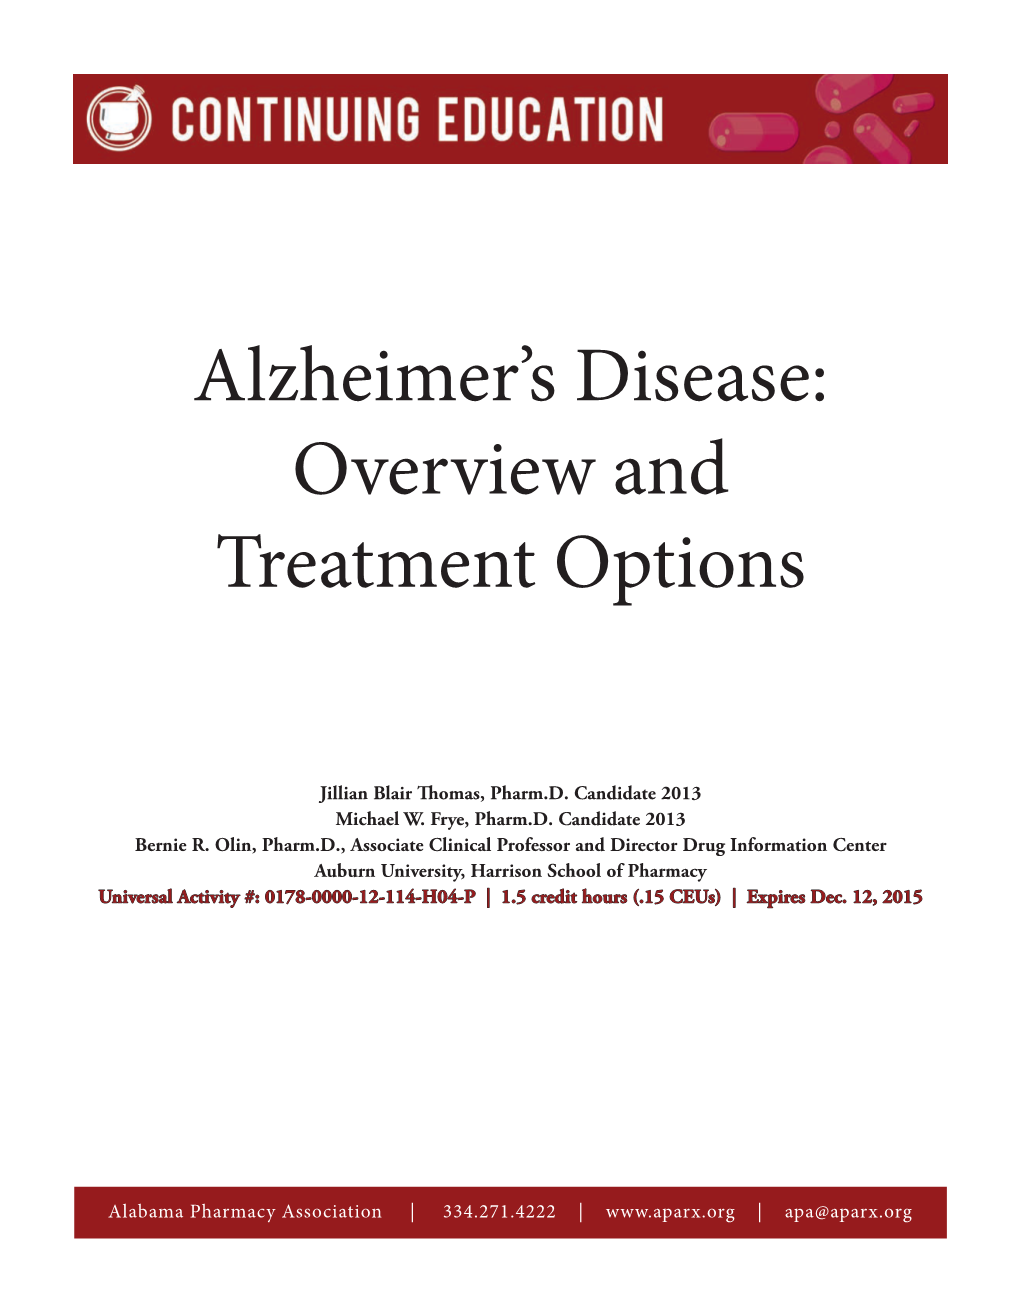 Alzheimer's Disease: Overview and Treatment Options